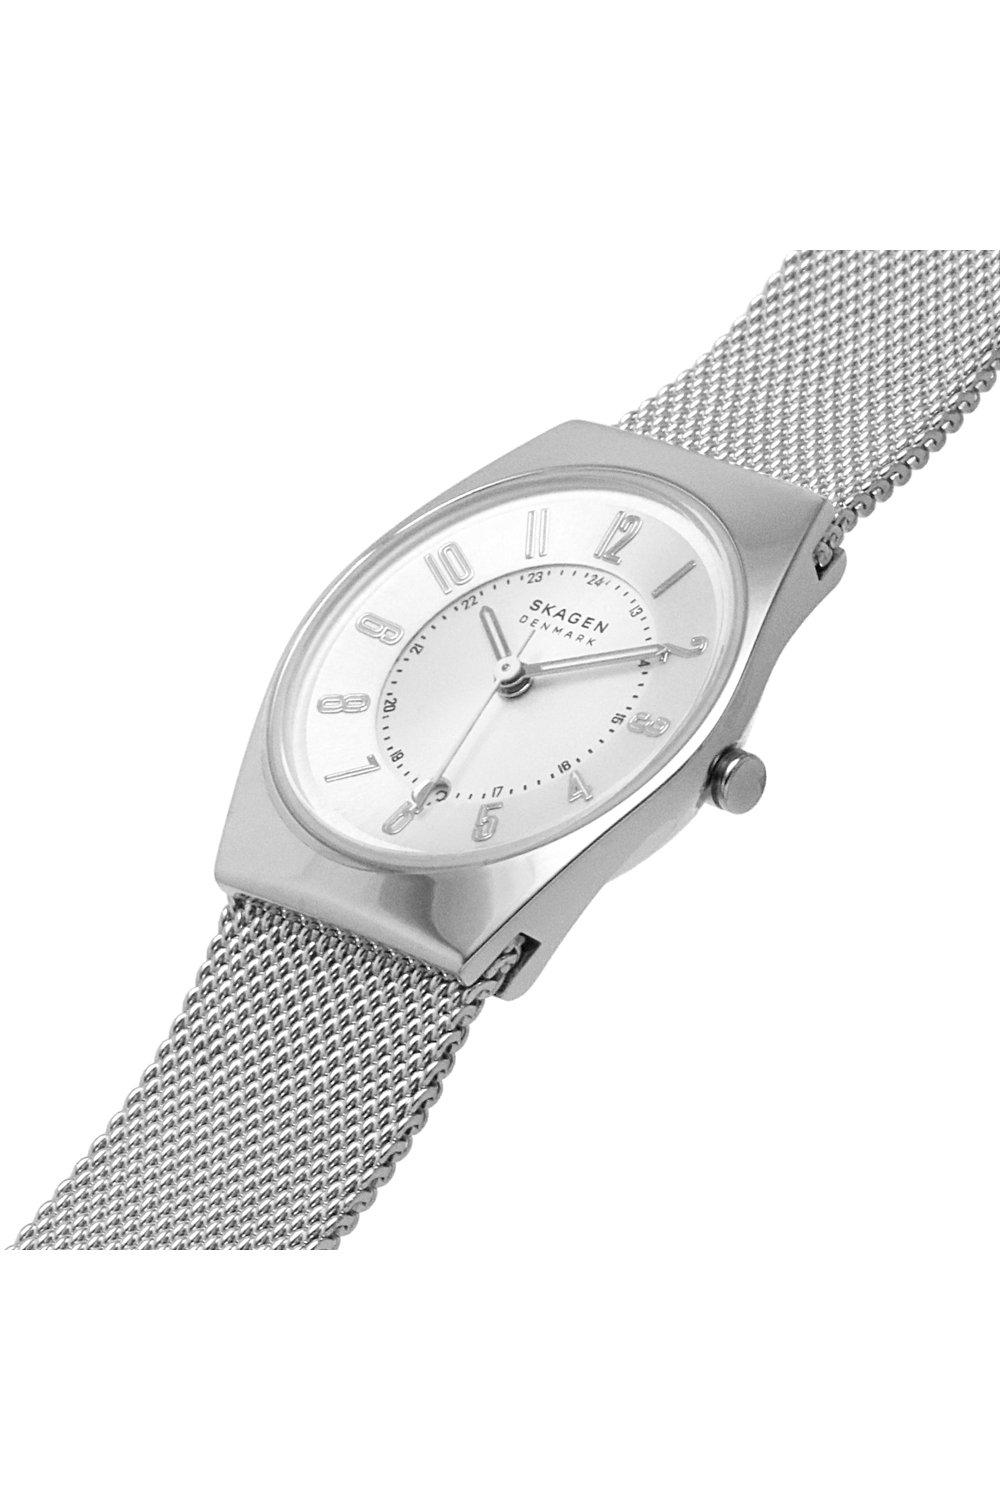 Watches | Grenen Lille Stainless Steel Classic Analogue Quartz